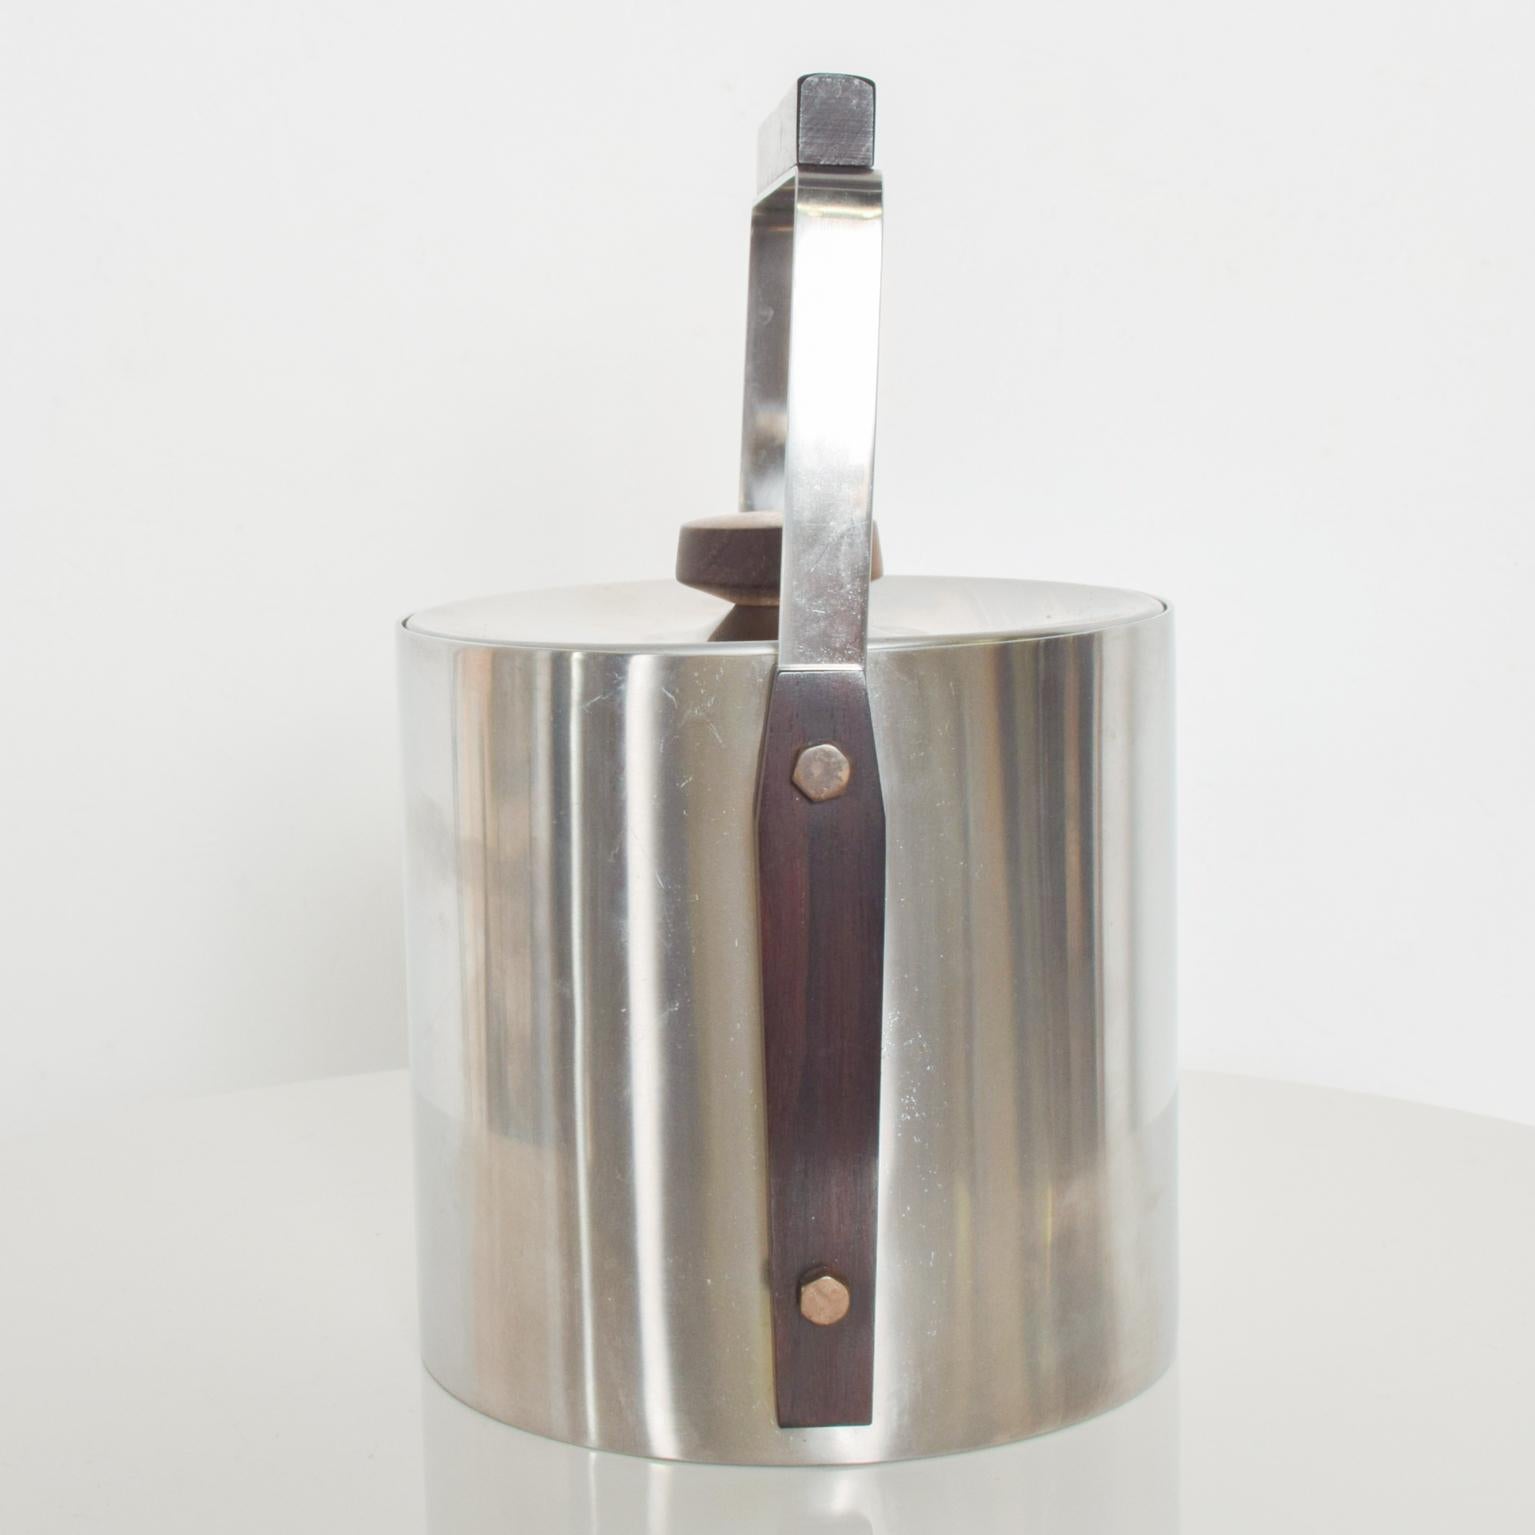 For your Pleasure: Vintage Barware Mid Century Modern CULTURA Ice Bucket in Stainless Steel with trim accents in Walnut Wood . Made in Sweden, 1960s.

Signed Cultura 18-8 Stainless Sweden. Heavy quality vintage piece.

Features convenient carry